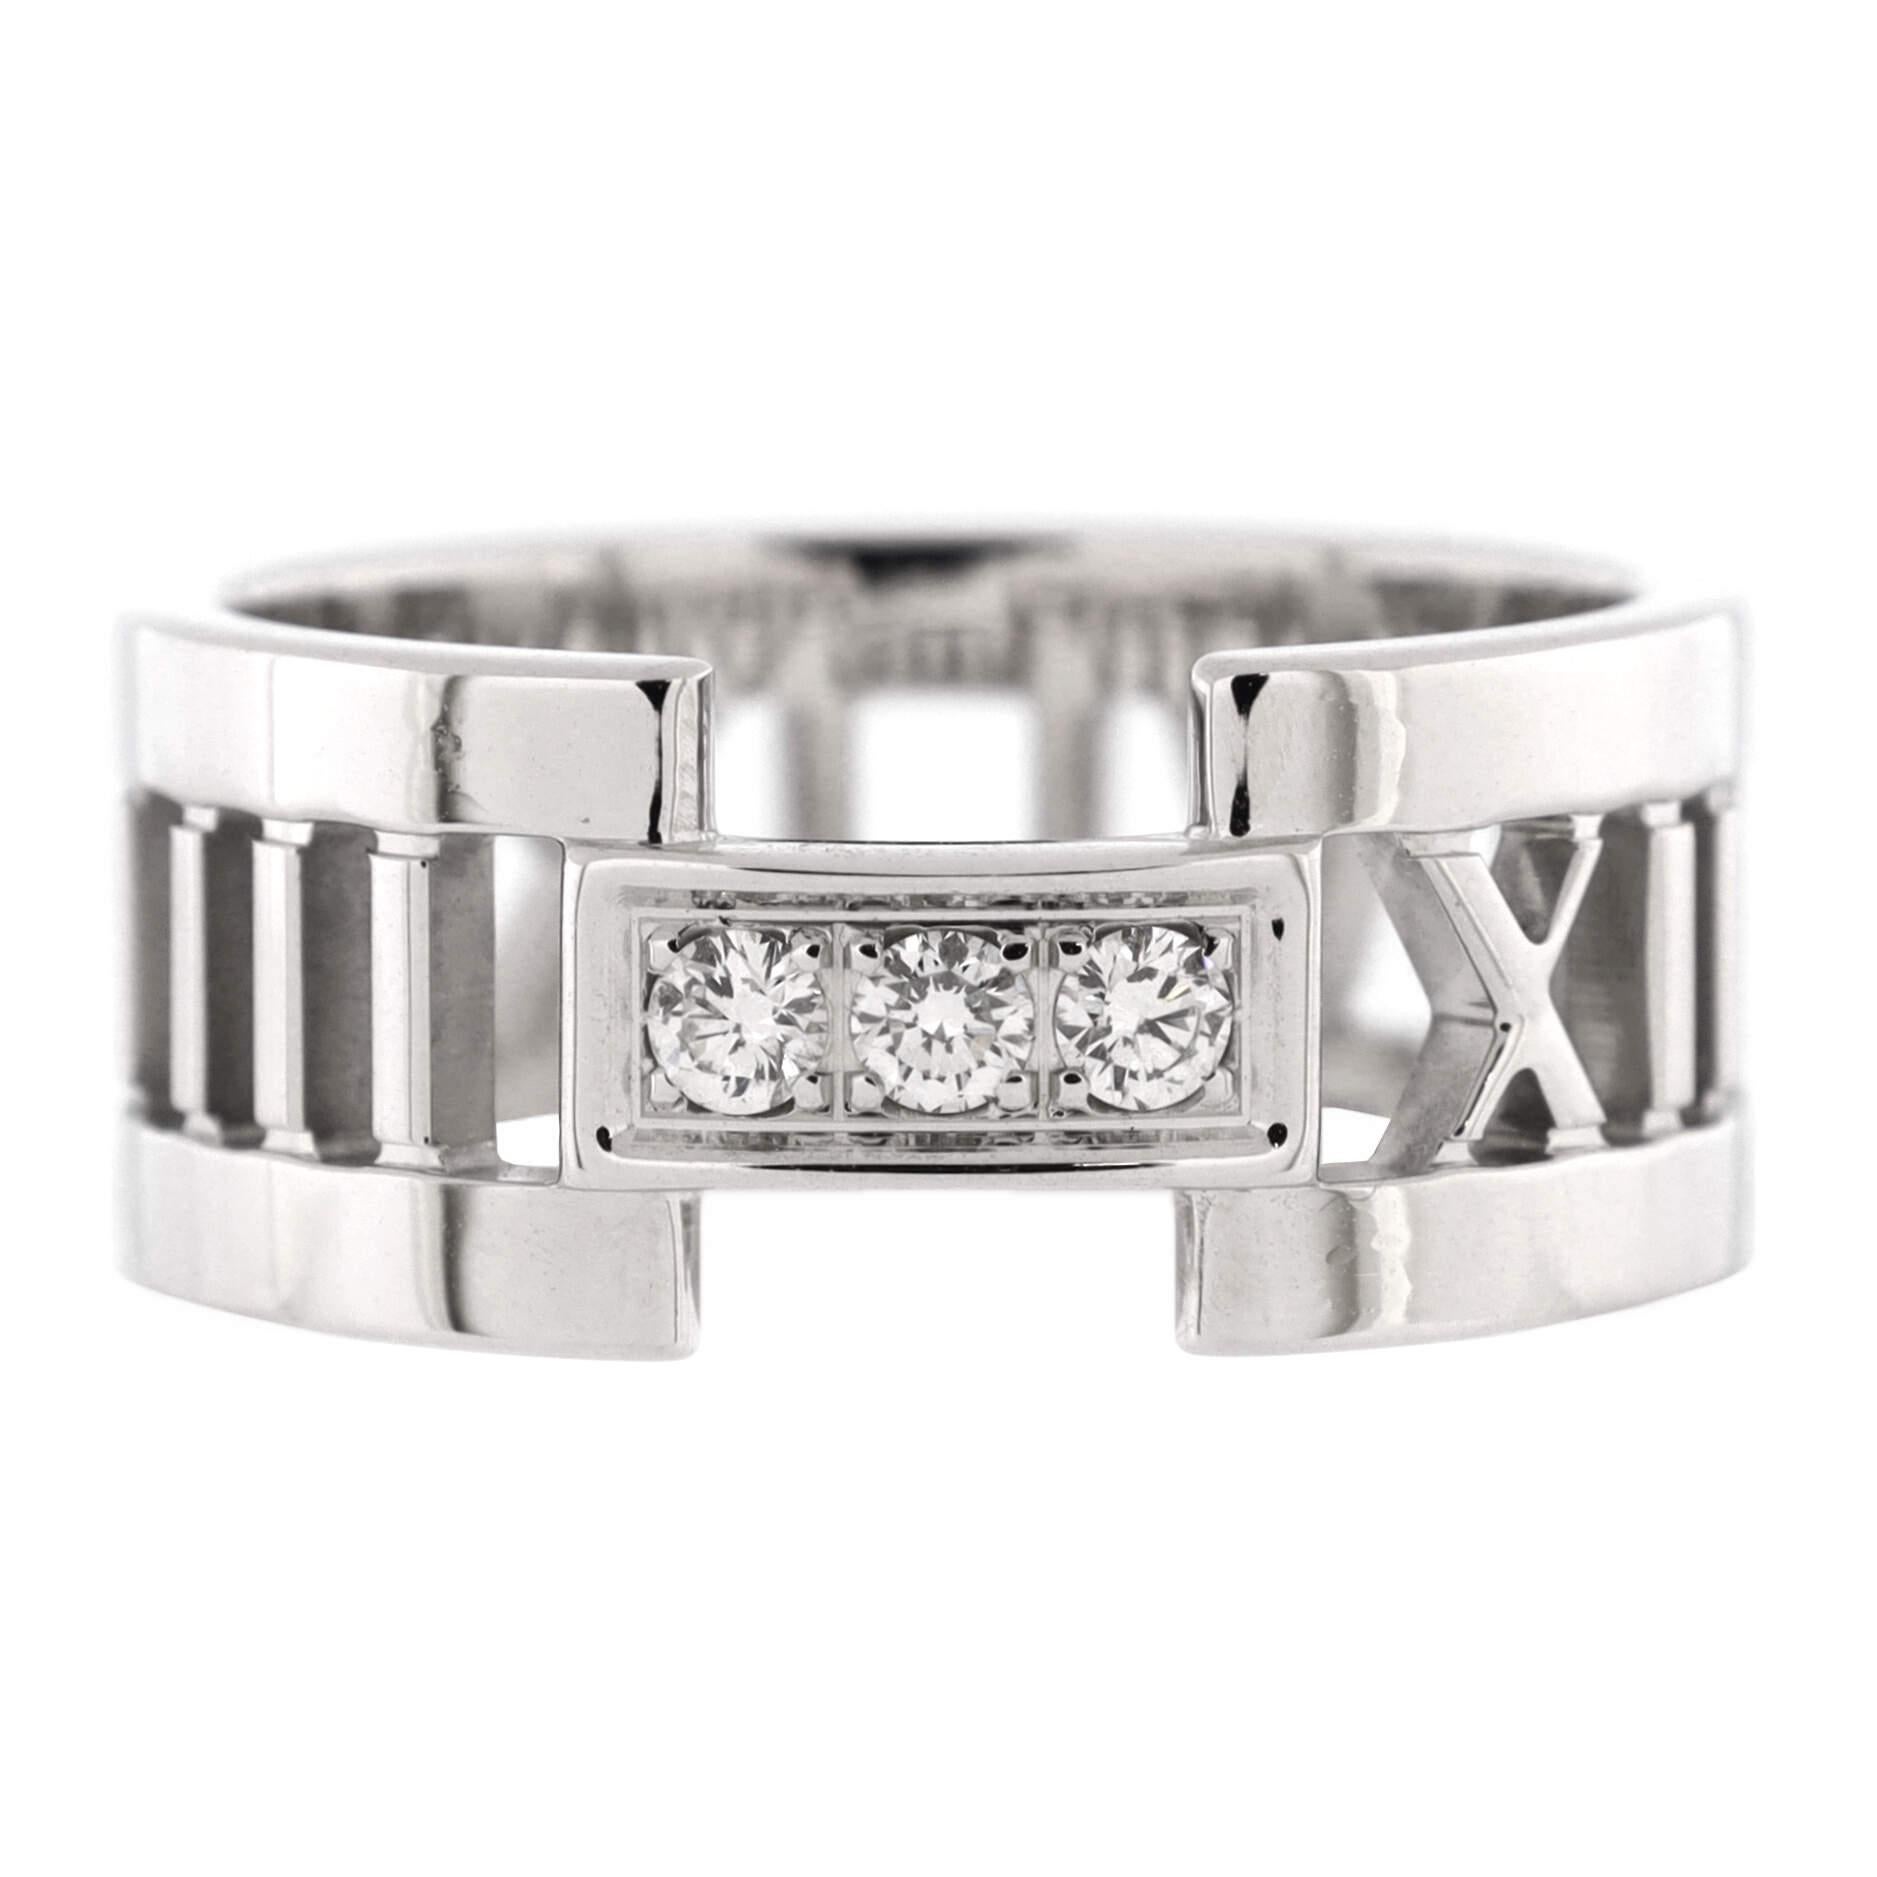 Condition: Great. Minor wear throughout.
Accessories: No Accessories
Measurements: Size: 7, Width: 8.45 mm
Designer: Tiffany & Co.
Model: Atlas Open Band Ring 18K White Gold and Diamonds
Exterior Color: White Gold
Item Number: 214405/14